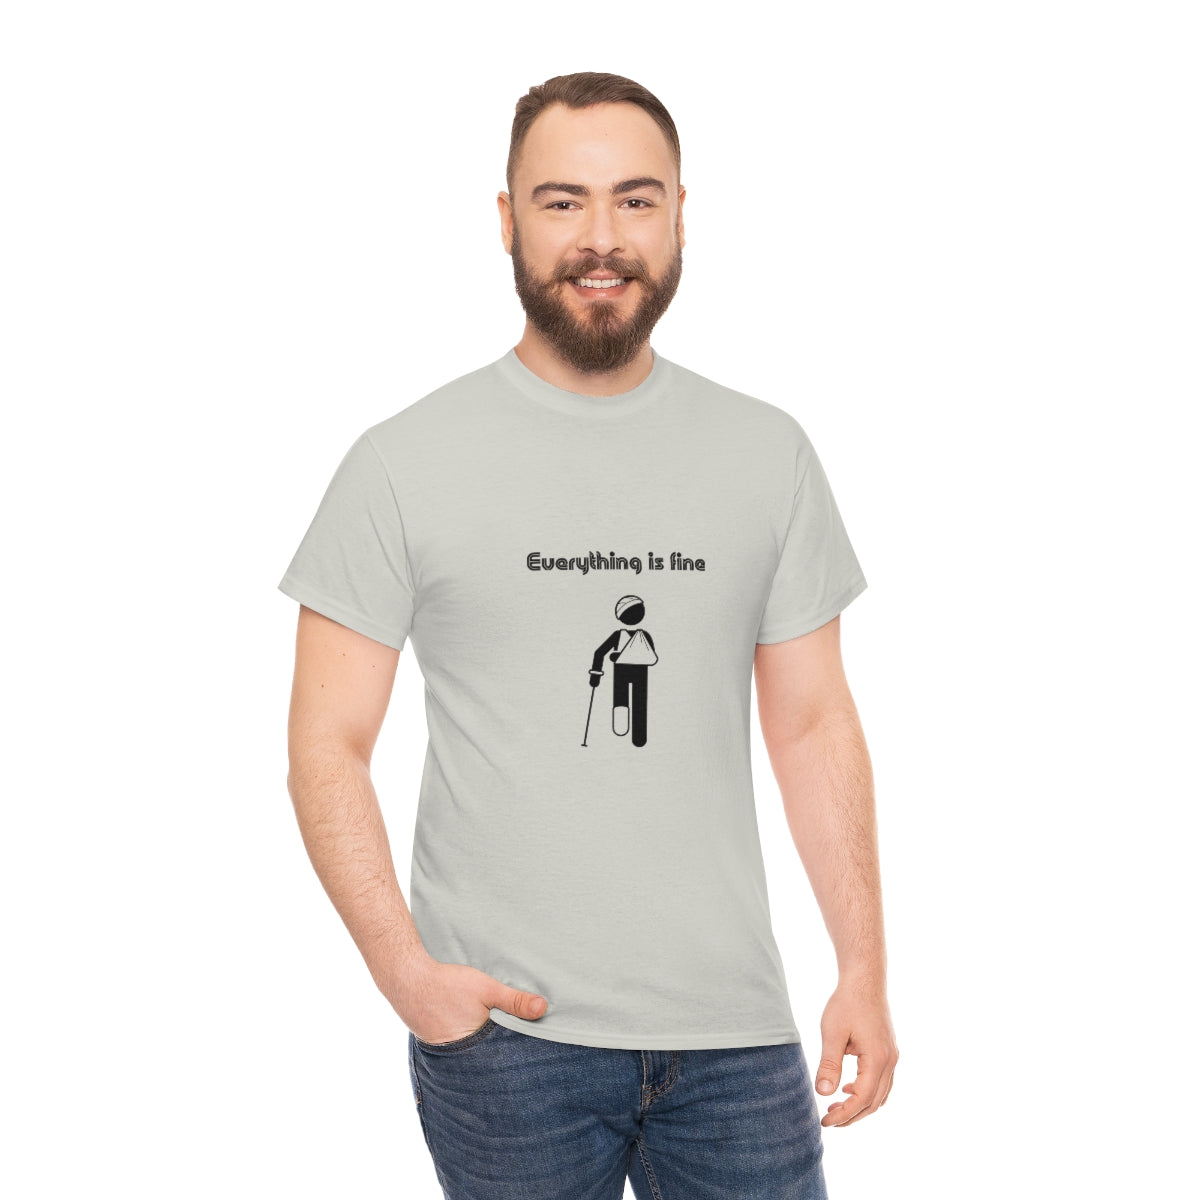 Everything is Fine Tshirt, I'm Fine Everything is Fine, Sarcastic Tshirt, Funny Tshirt, Recovering From Surgery Tshirt, Physical Therapy Tee - The Good Life Vibe